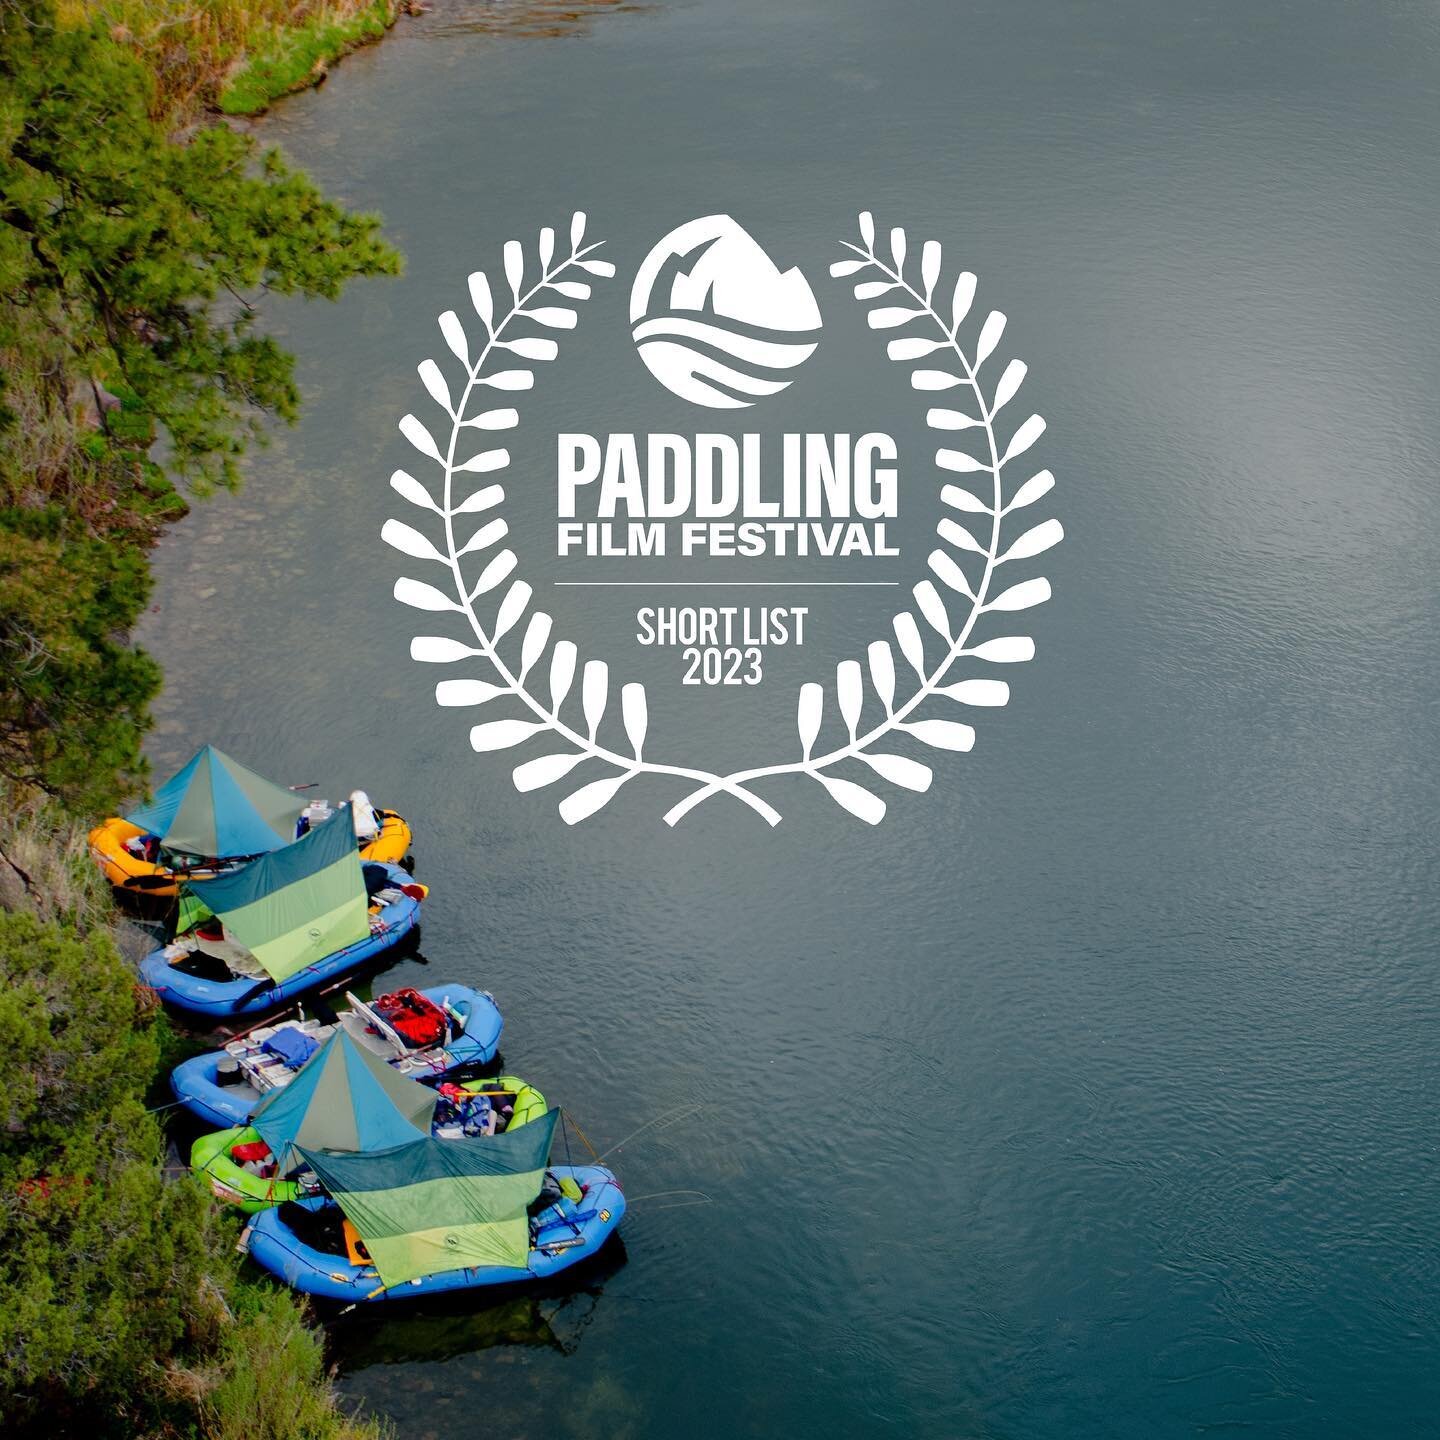 Stoked to announce that A River Out of Time will be traveling the globe with the @paddlingfilmfestival this year. Check out their website to see the schedule and screening locations. 
.
.
.
.
.
#powell150 #rigtoflip #rafting #nrs #nrsweb #airewhitewa